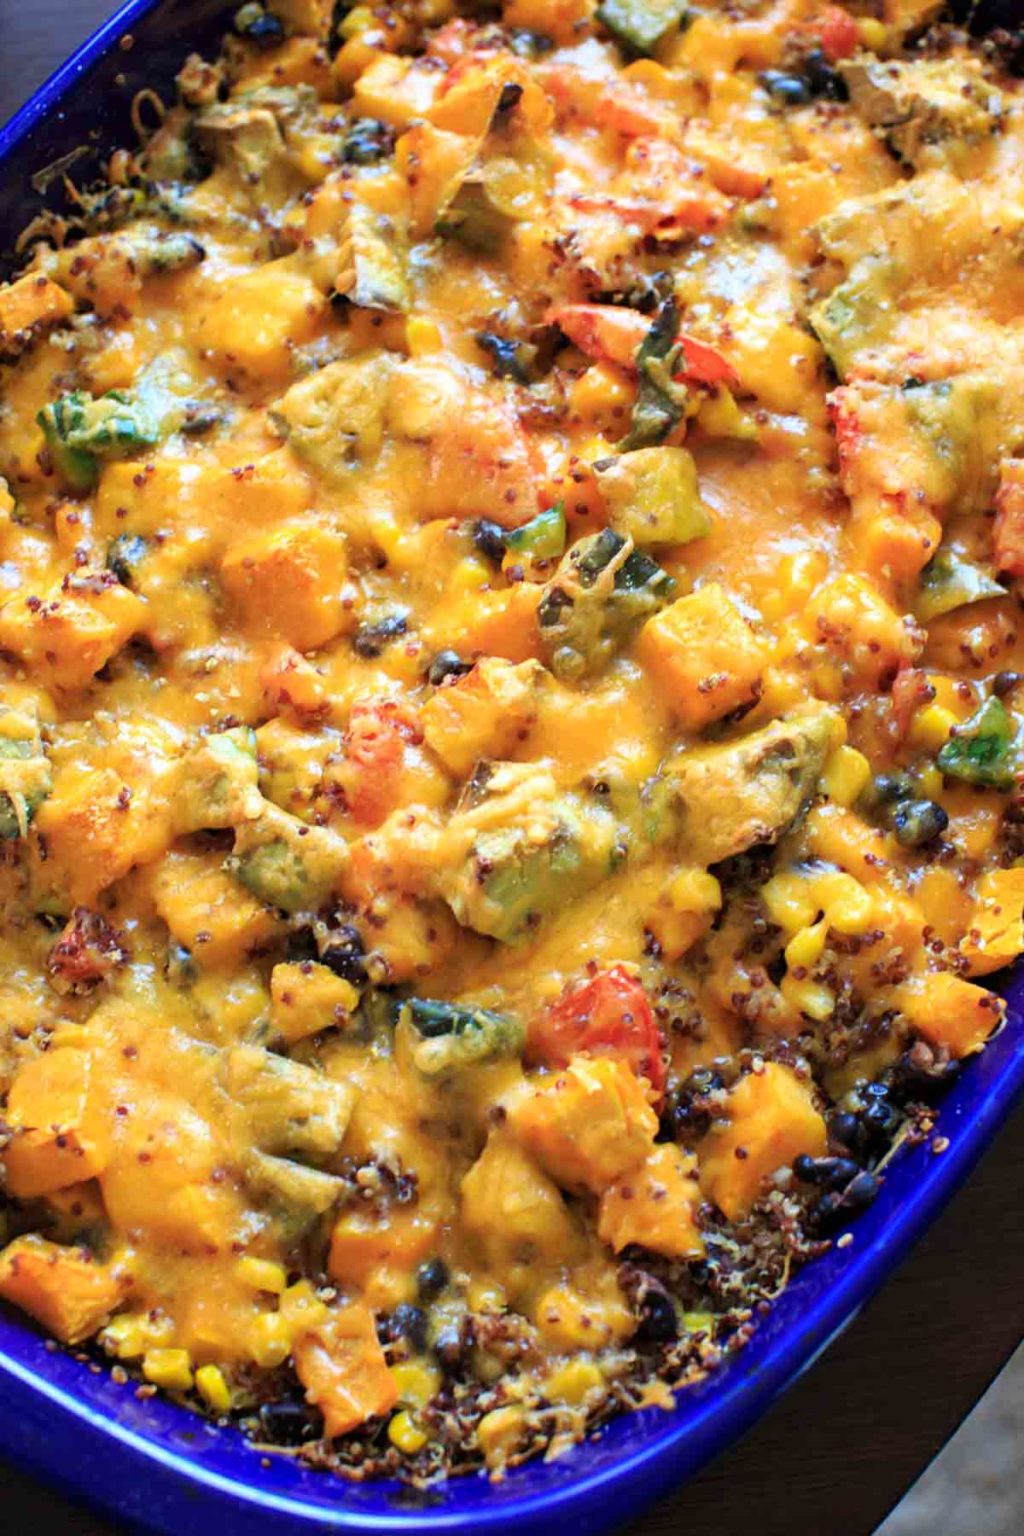 Butternut squash and other vegetables mixed together with quinoa makes a delicious vegetarian, gluten-free, and vegan friendly casserole for the whole family.